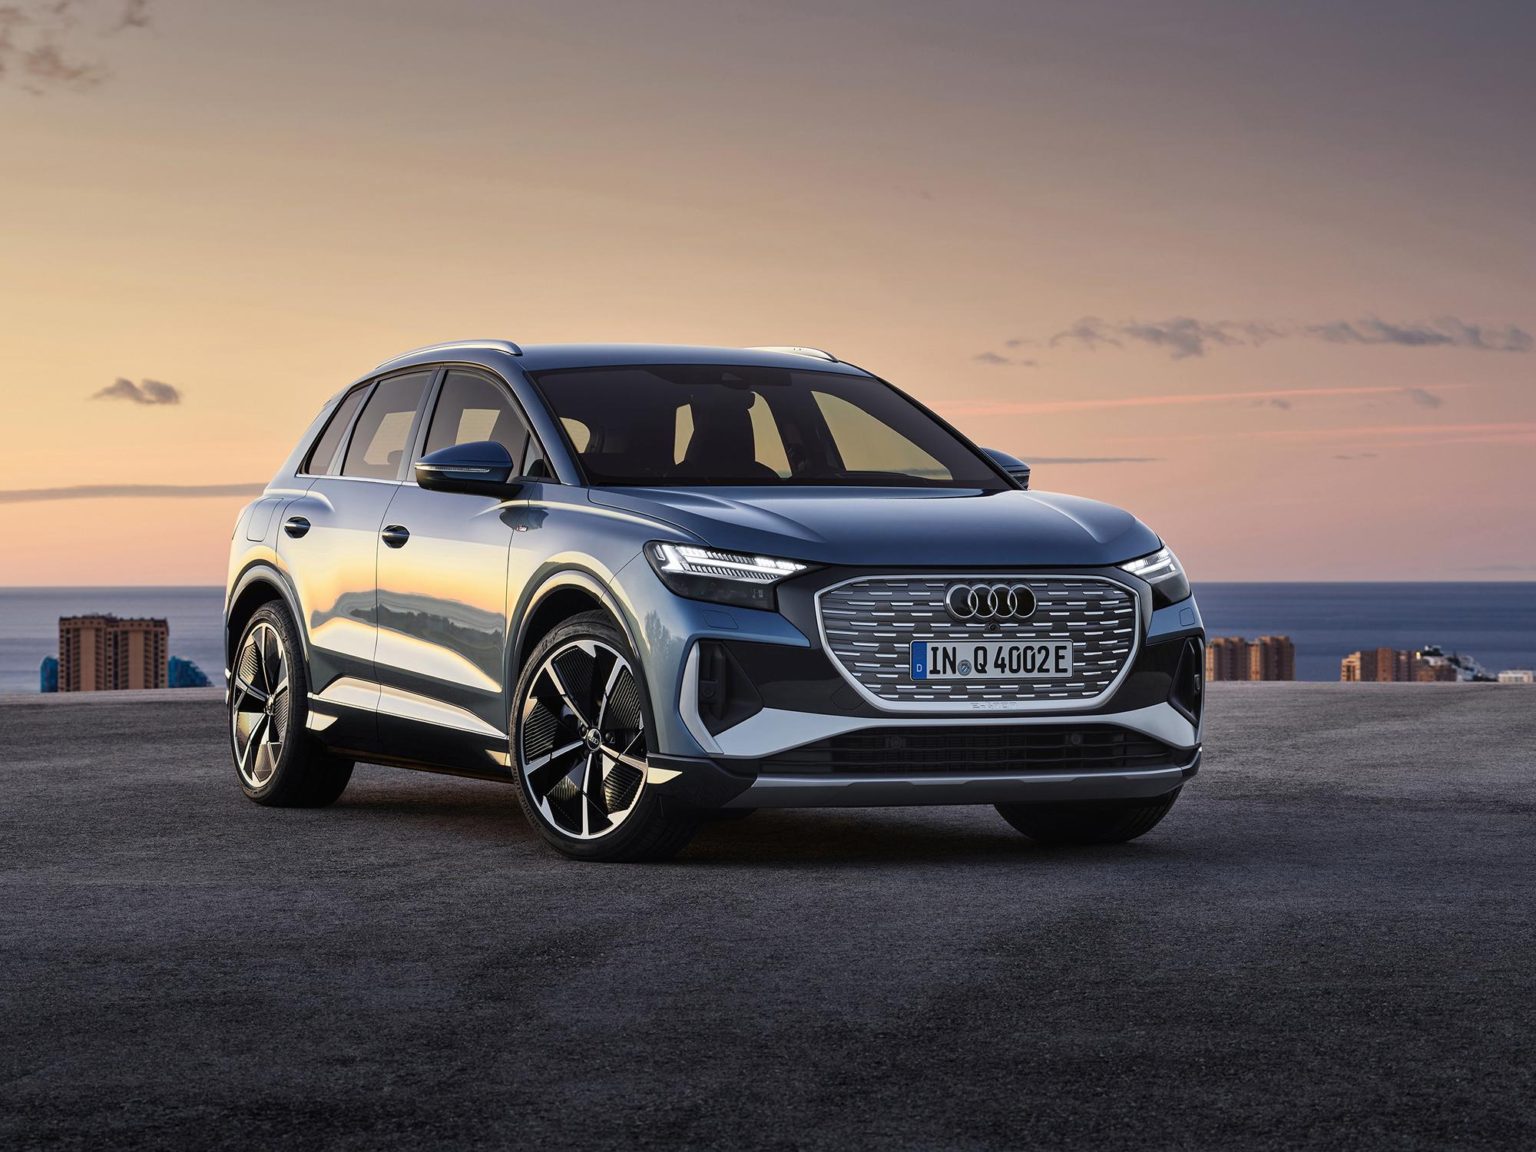 The 2022 Audi Q4 e-tron and Q4 Sportback e-tron mark the fourth and fifth EVs Audi is bringing to the U.S.